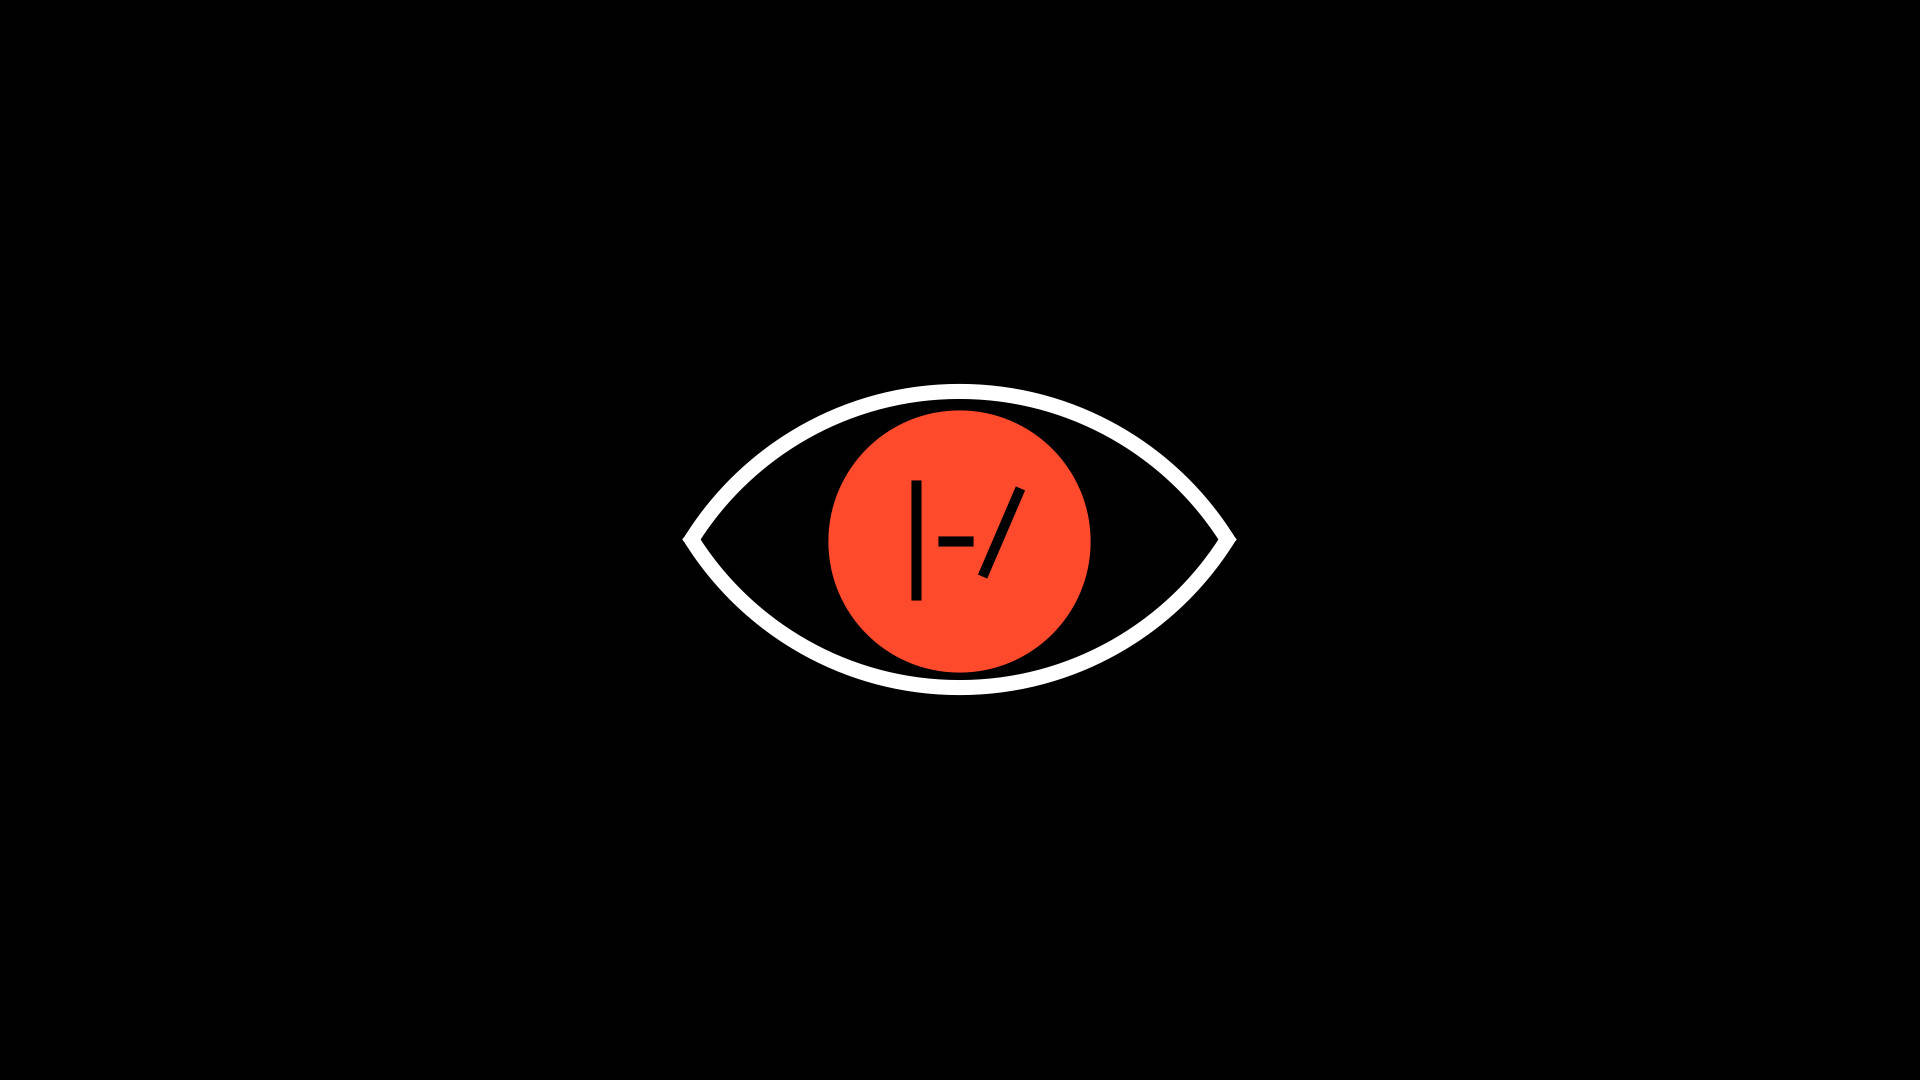 A Black Background With An Eye Logo On It Background